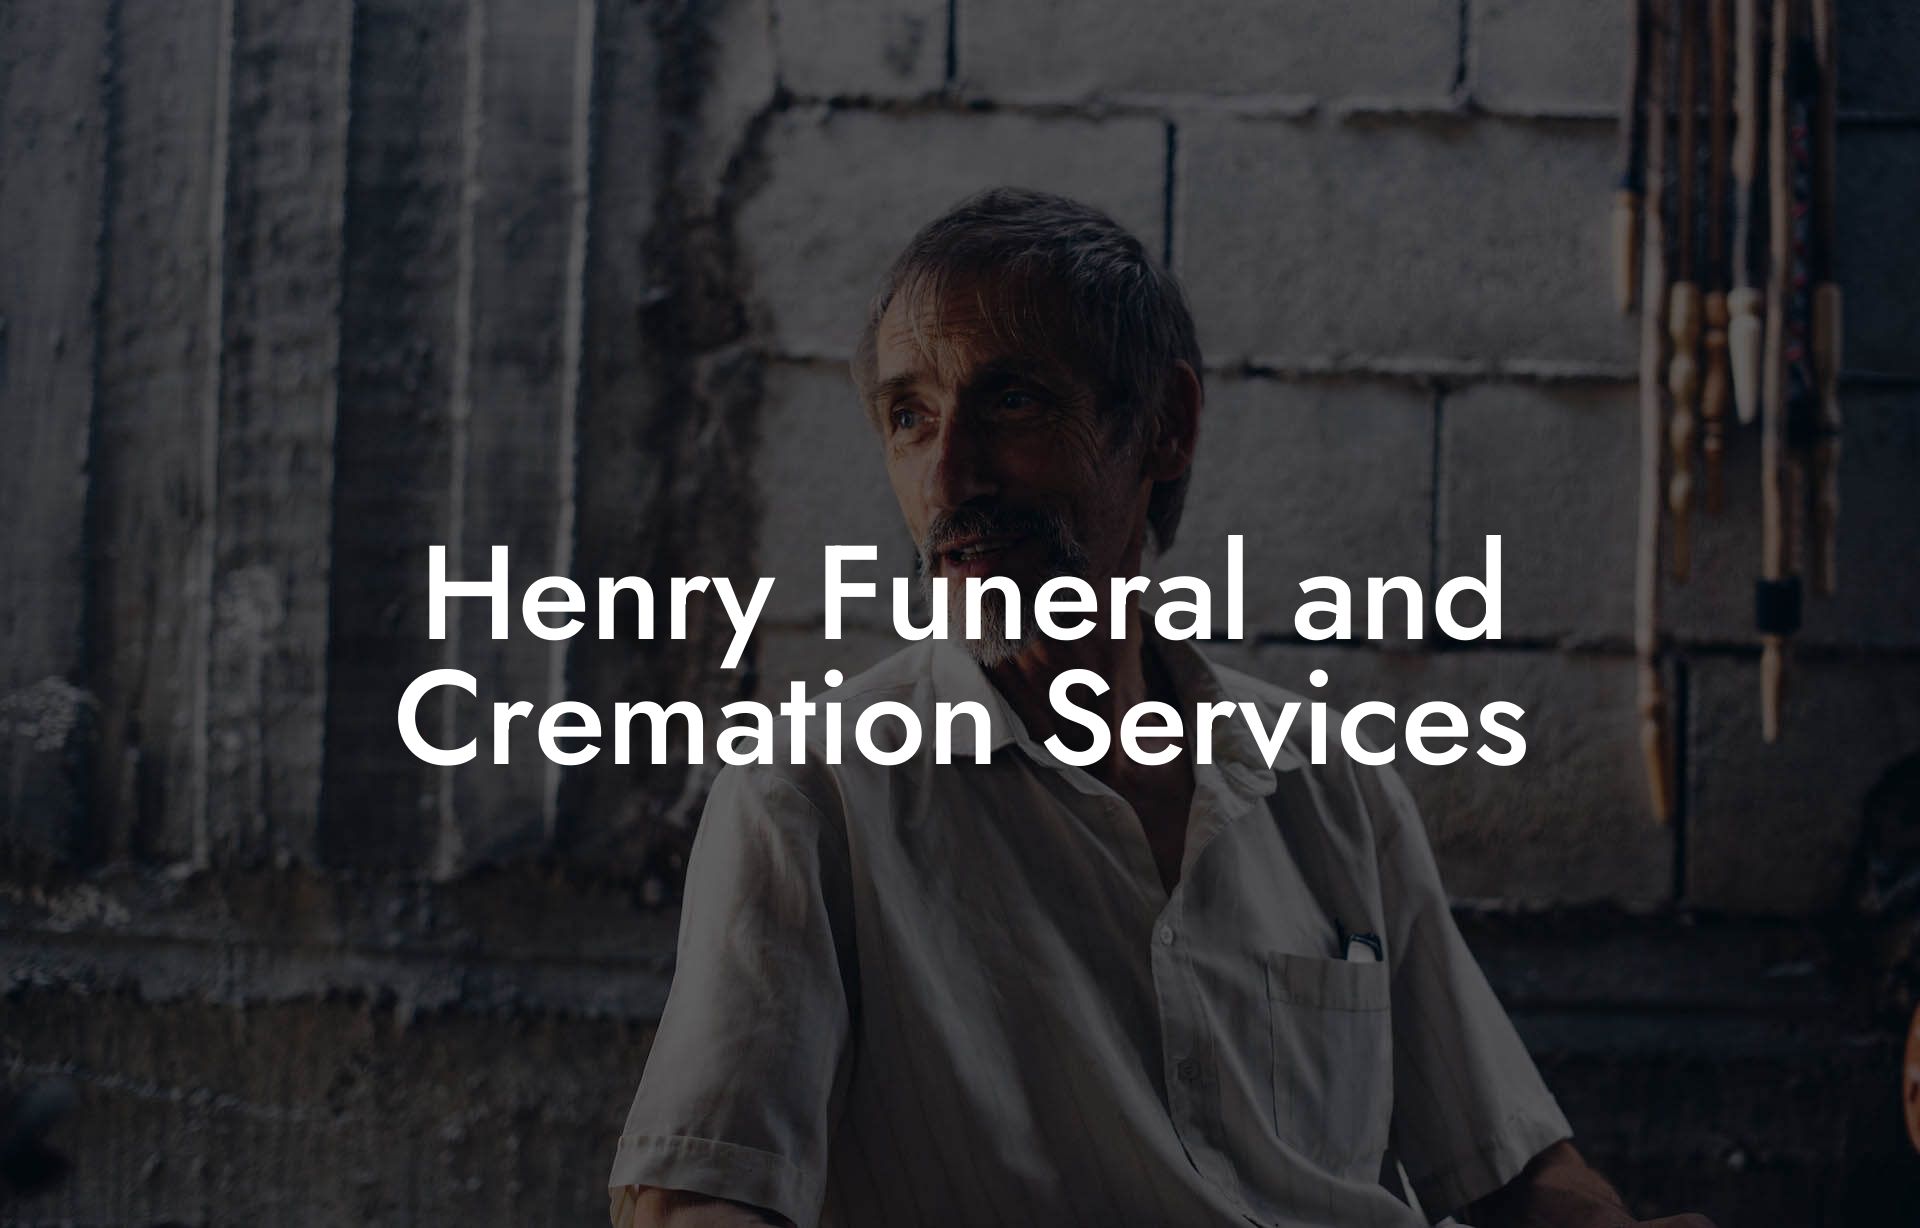 Henry Funeral and Cremation Services